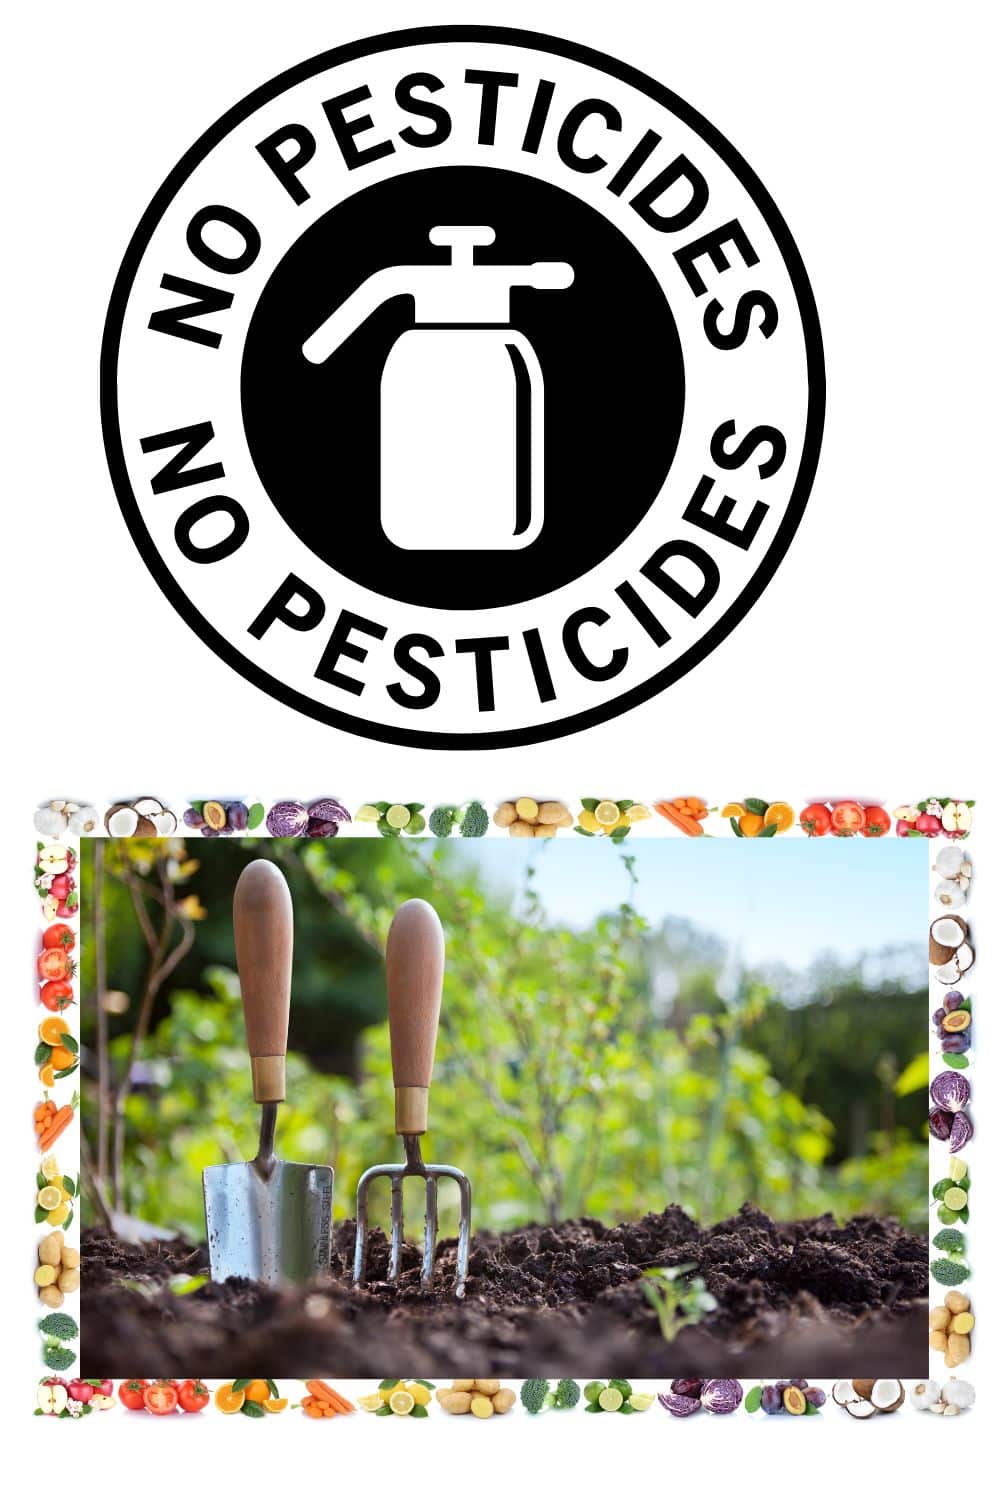 non-toxic weed control using 0 chemicals